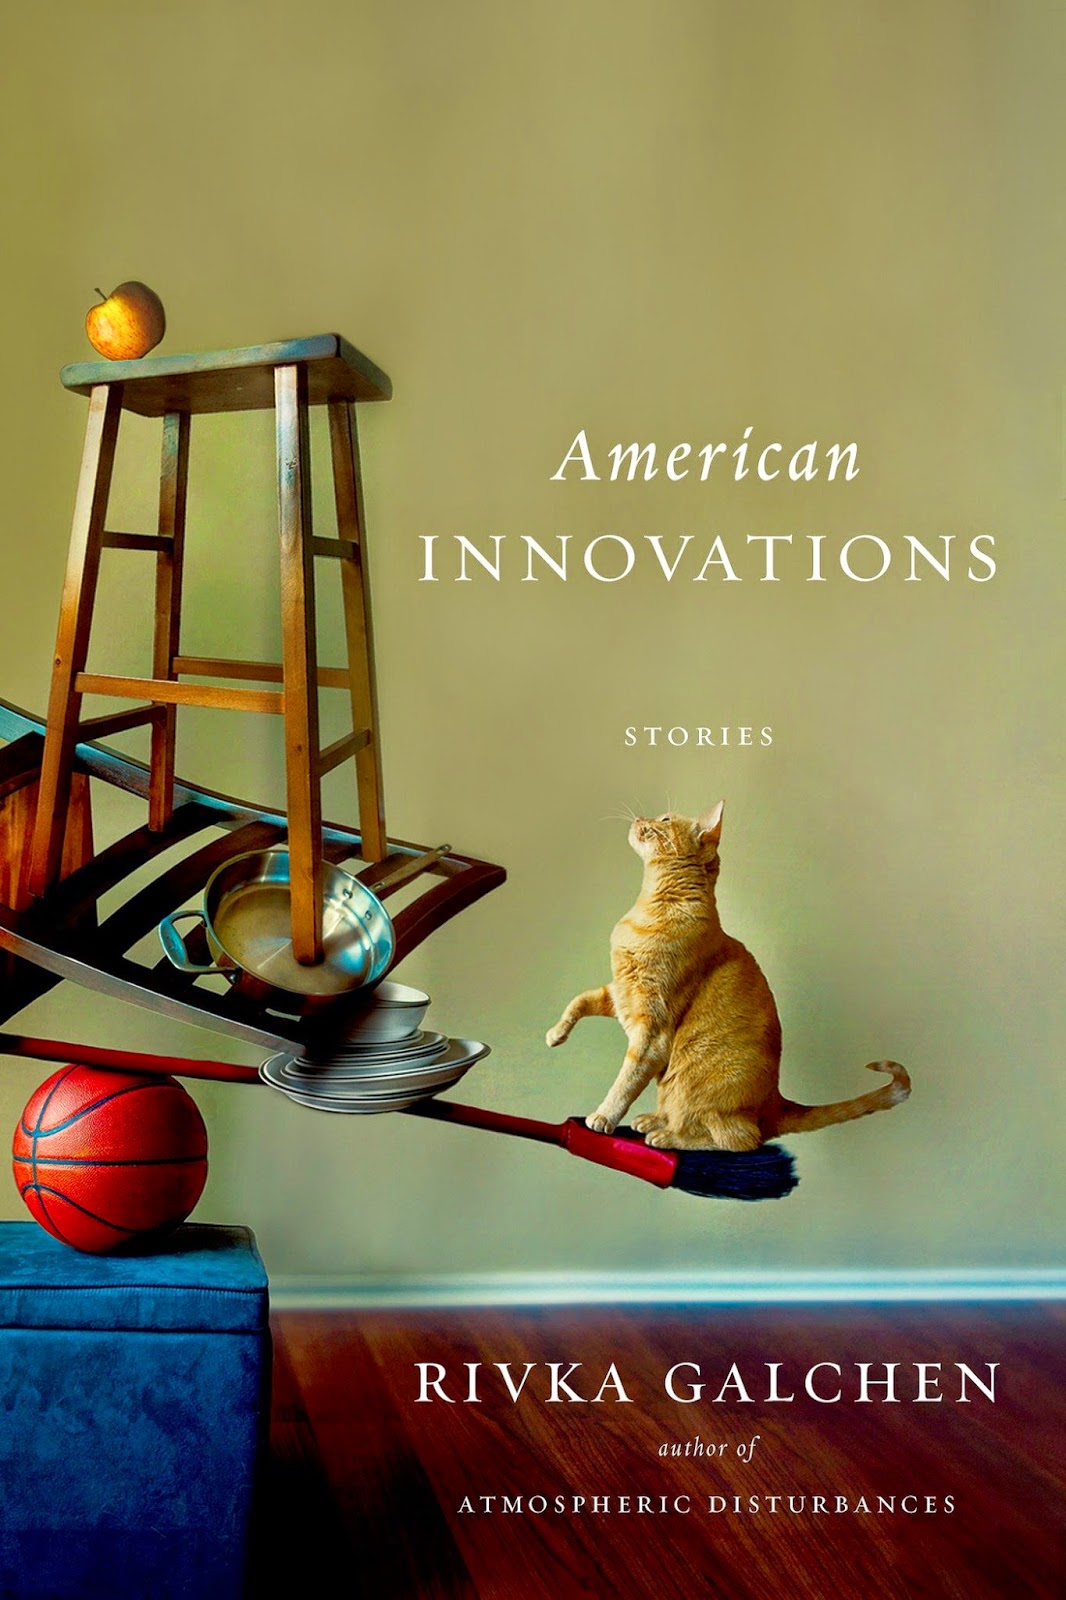 http://discover.halifaxpubliclibraries.ca/?q=title:american%20innovations